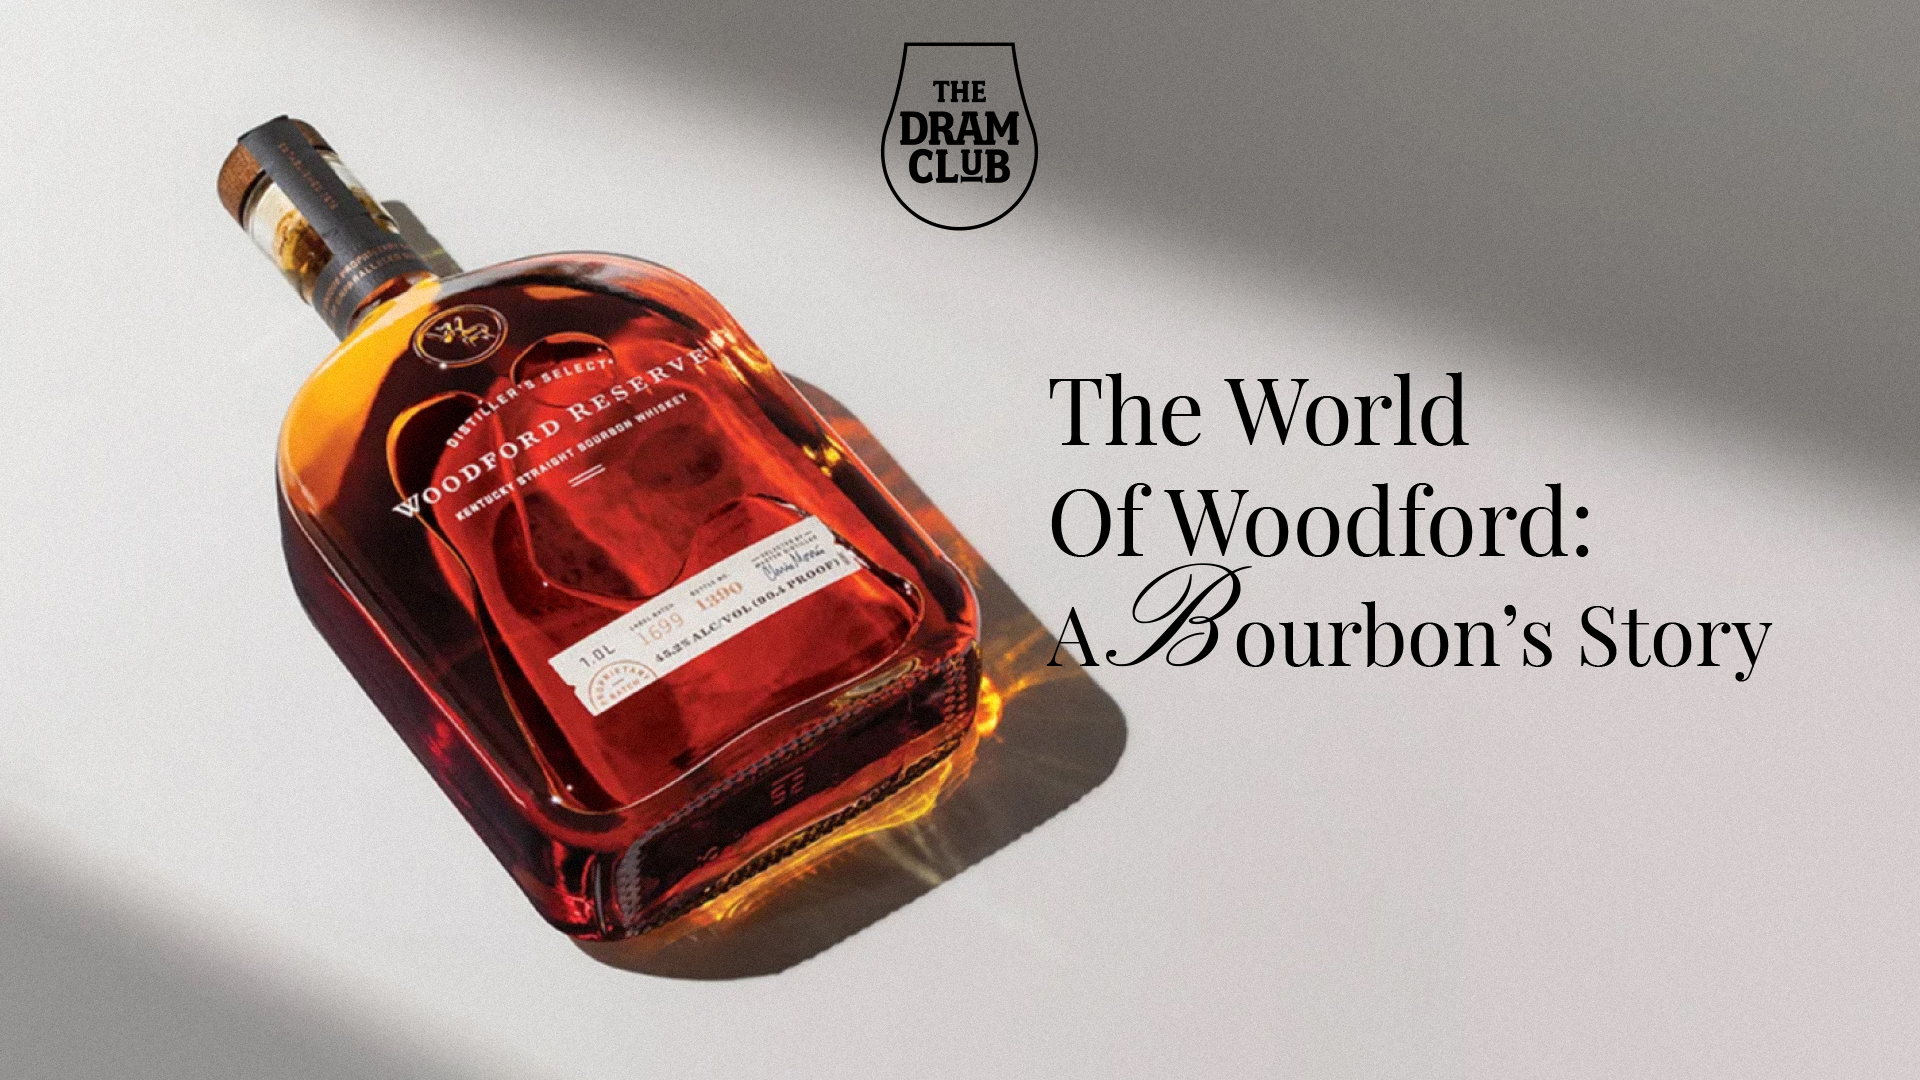 The World of Woodford: A Bourbon’s Story